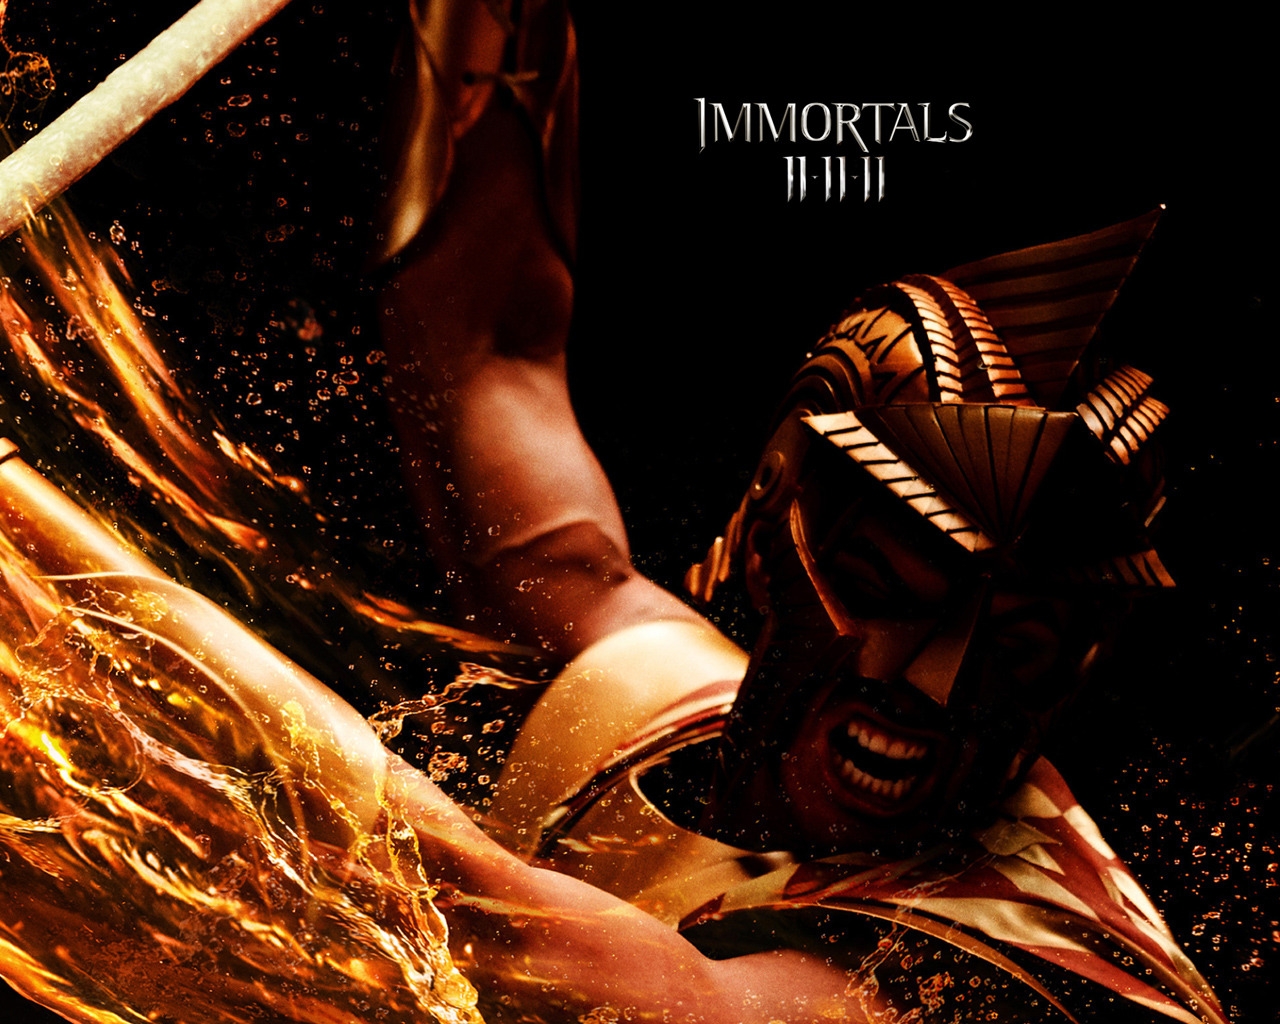 Immortals 2011 Movie for 1280 x 1024 resolution